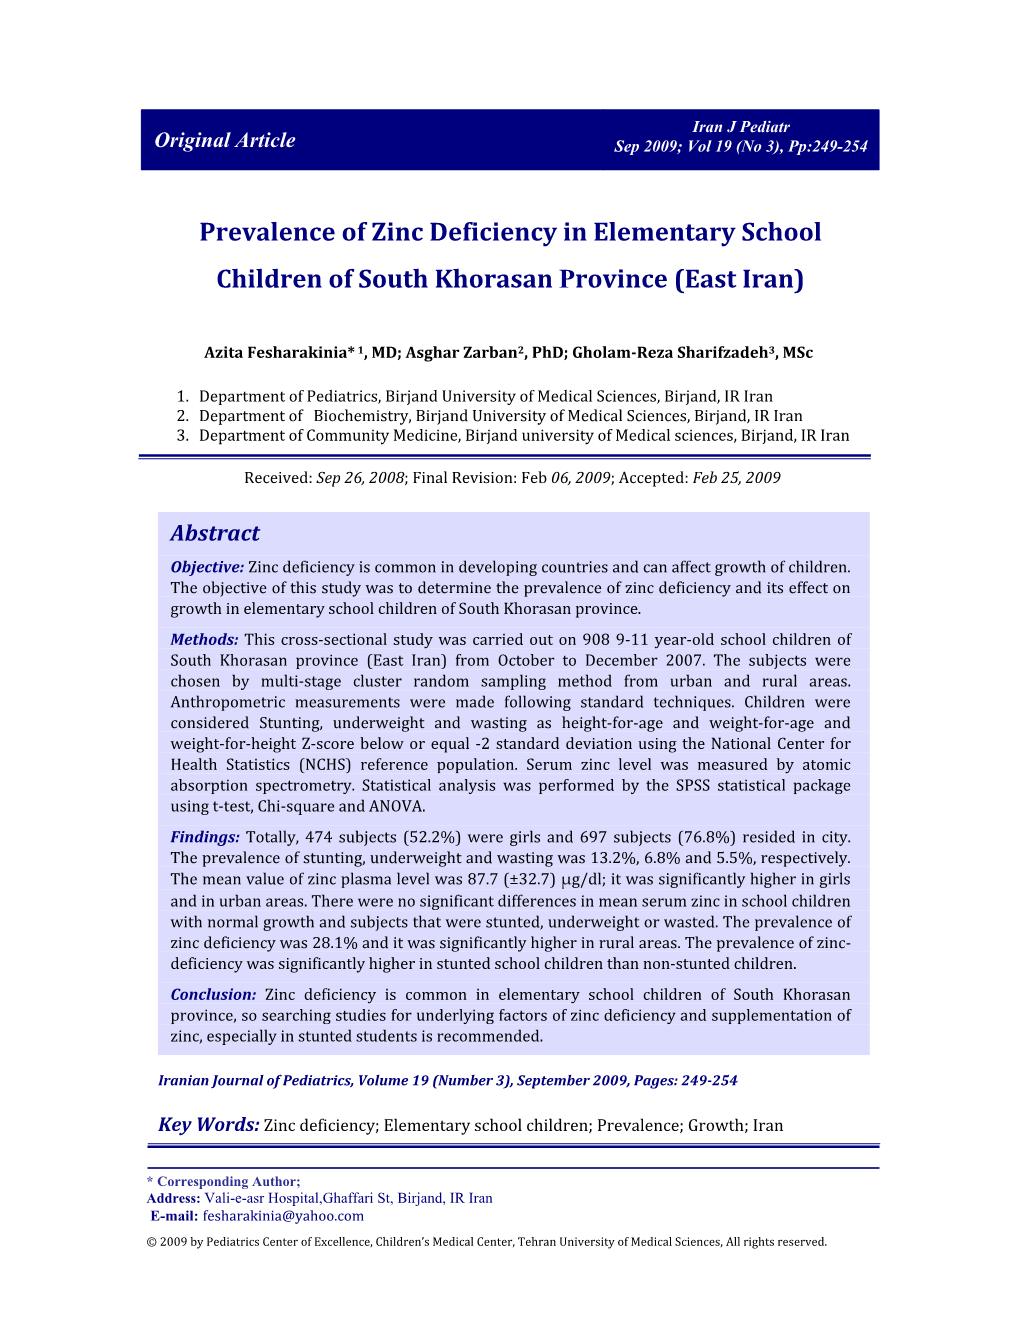 Prevalence of Zinc Deficiency in Elementary School Children of South Khorasan Province (East Iran)